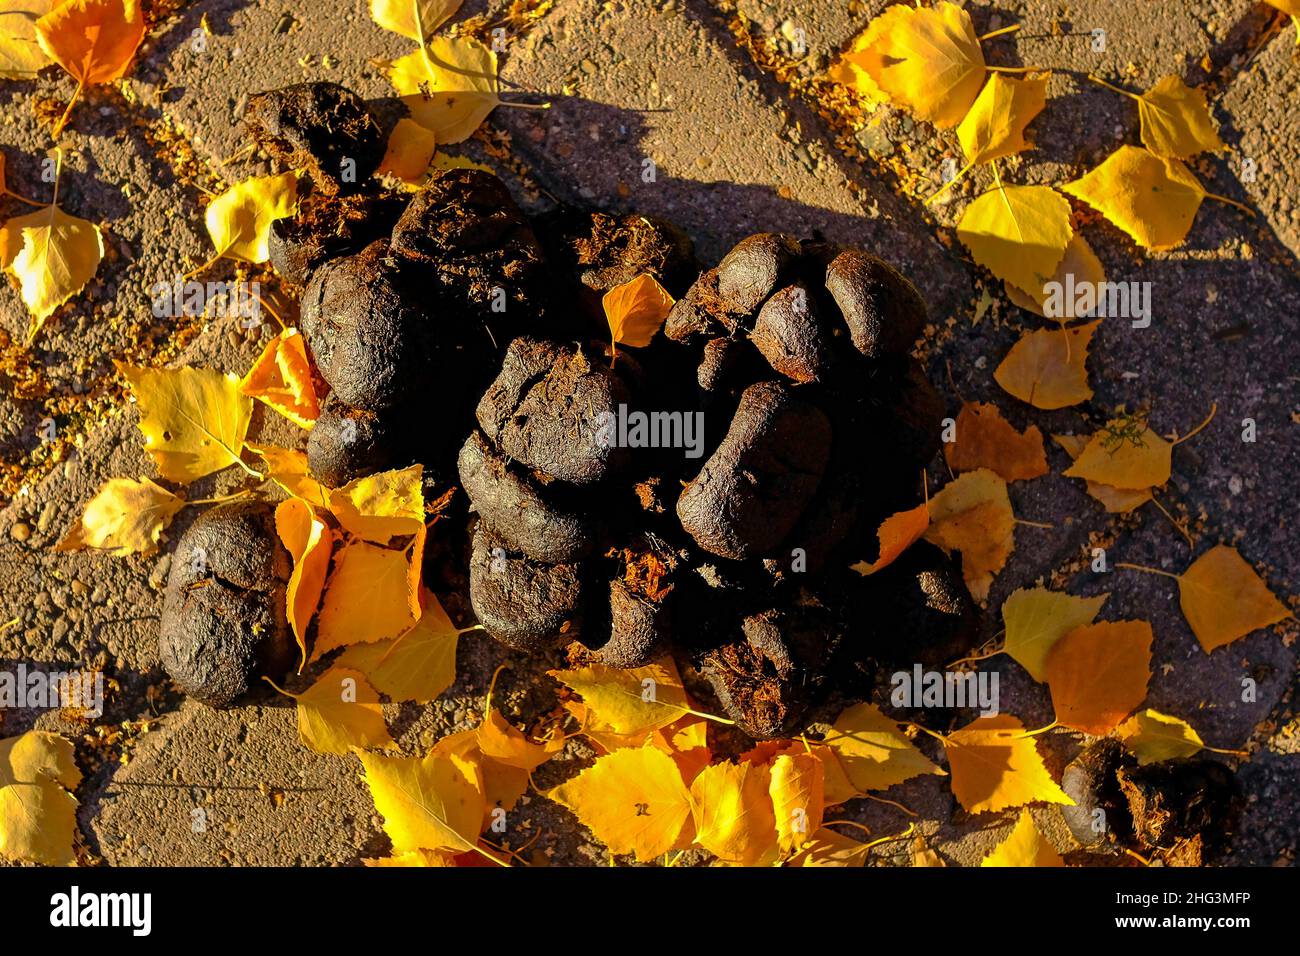 Horse dung in autumn leaves. Filmed from above, no people. Stock Photo